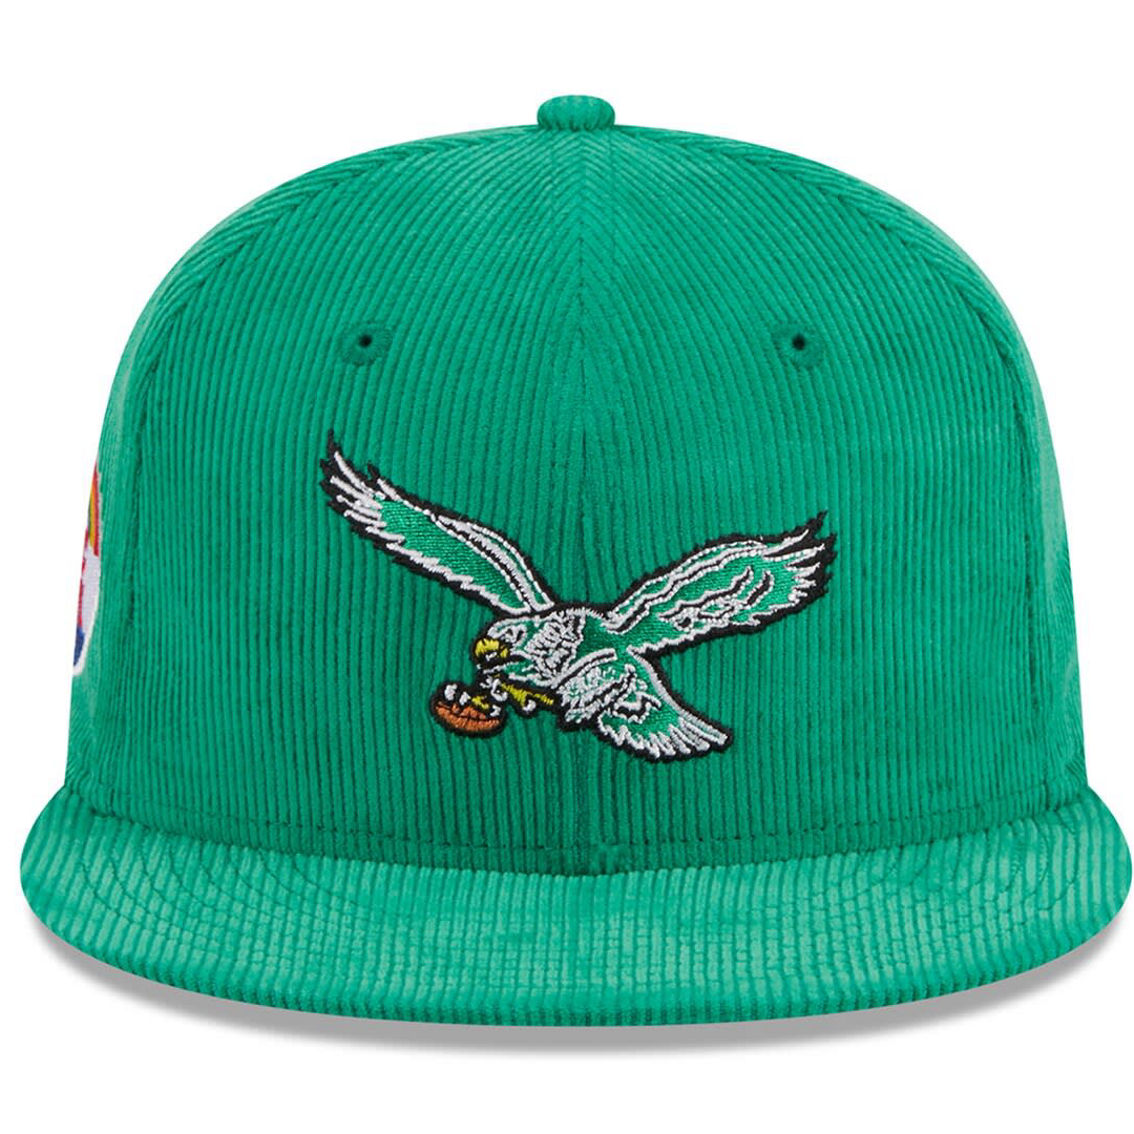 New Era Men's Kelly Green Philadelphia Eagles Throwback Cord 59FIFTY Fitted Hat - Image 3 of 4